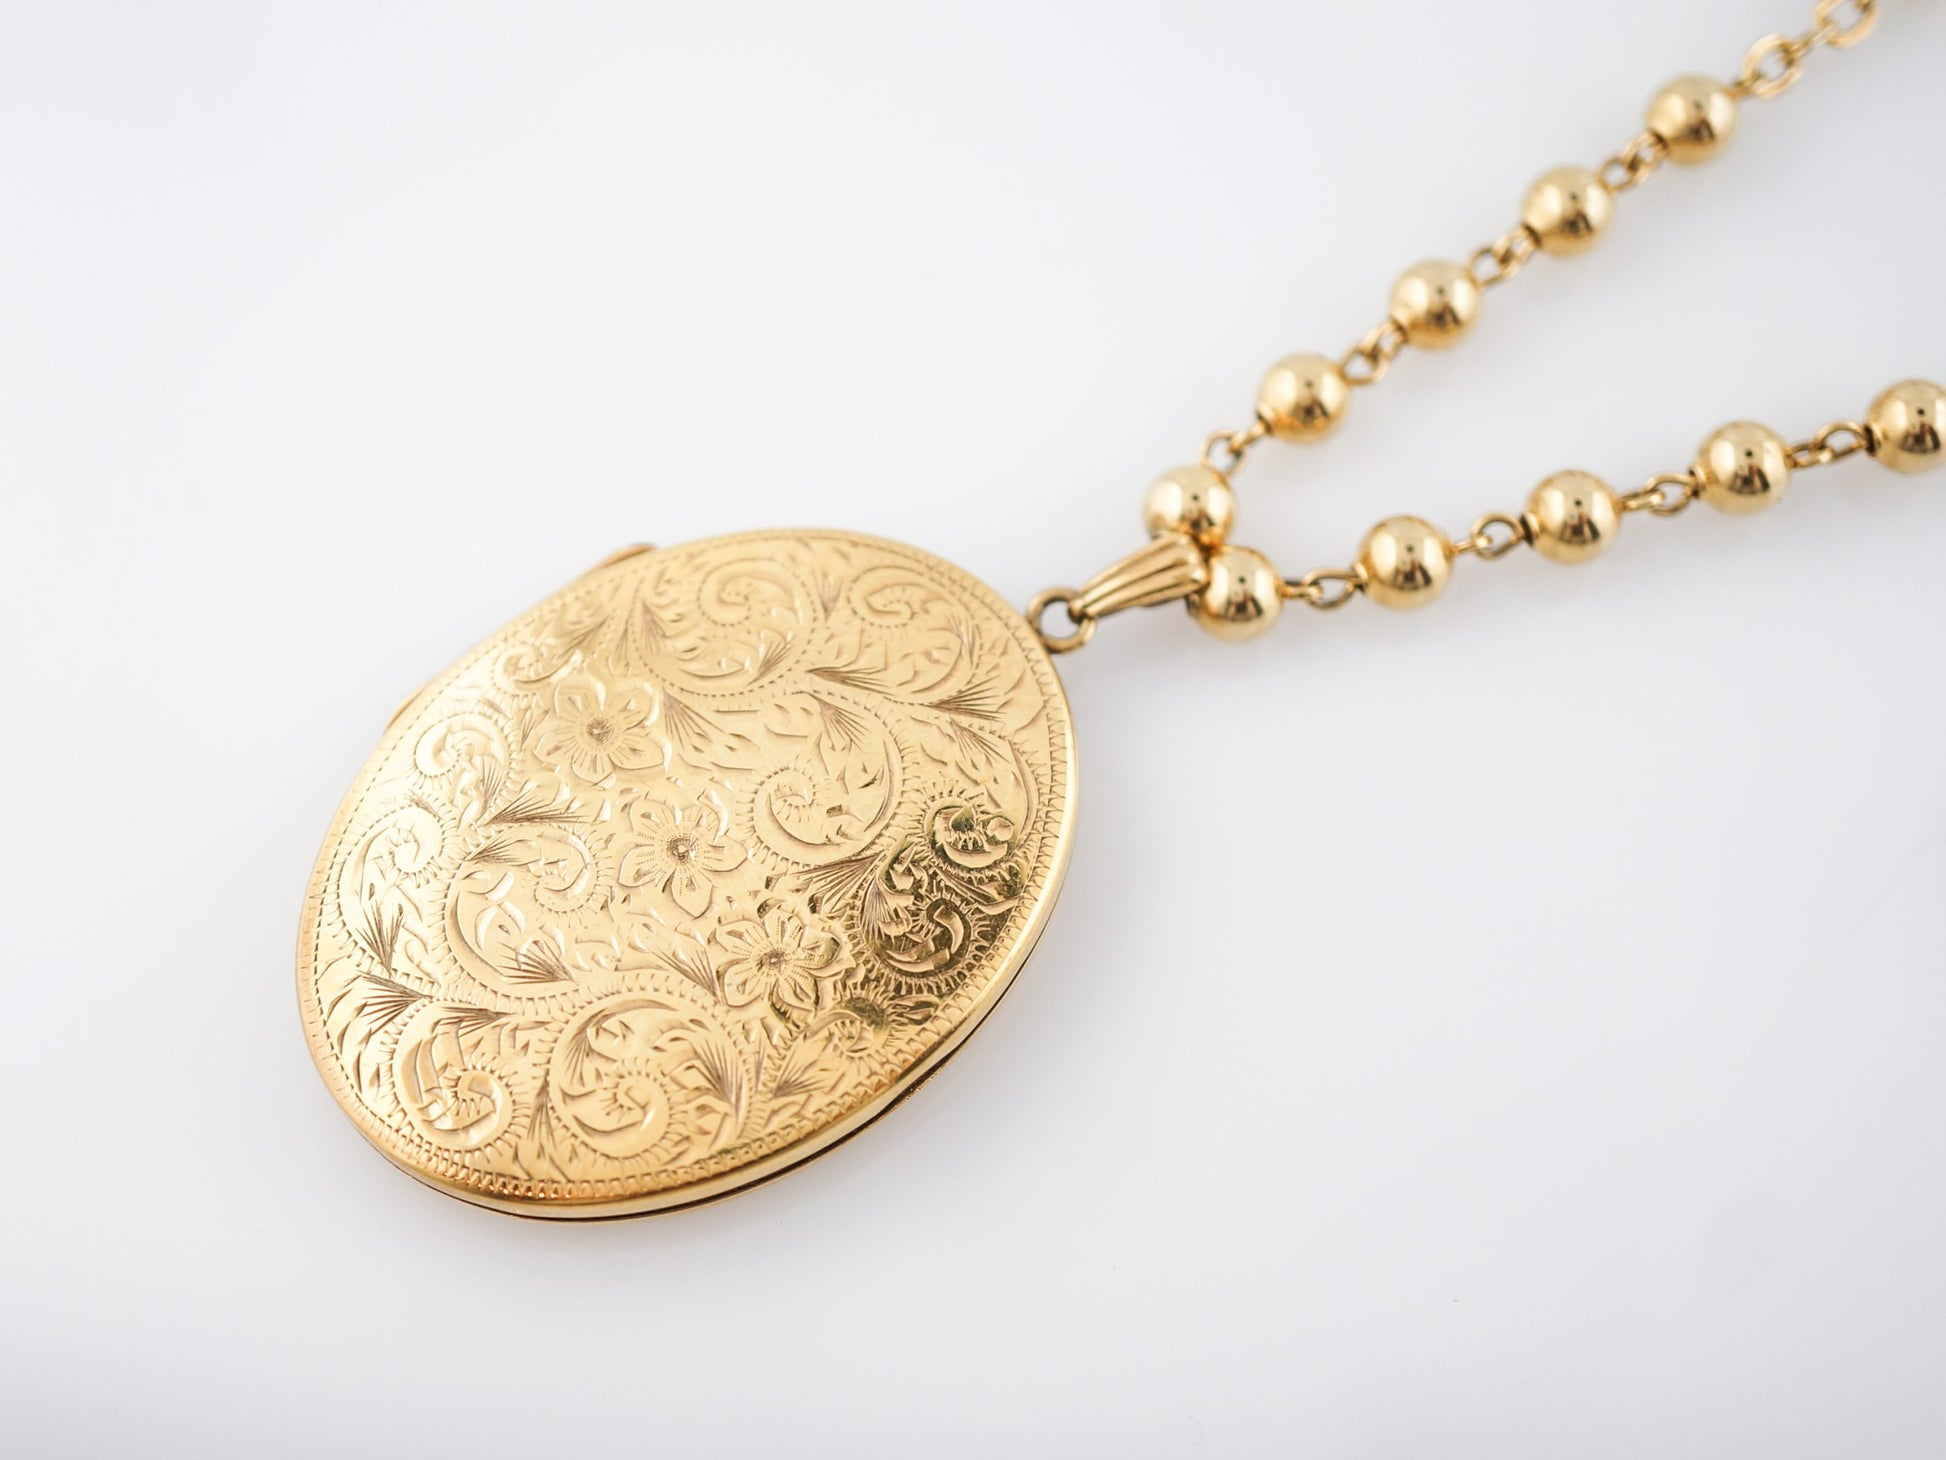 Antique Victorian Necklace & Large Oval Locket in 14k Yellow Gold